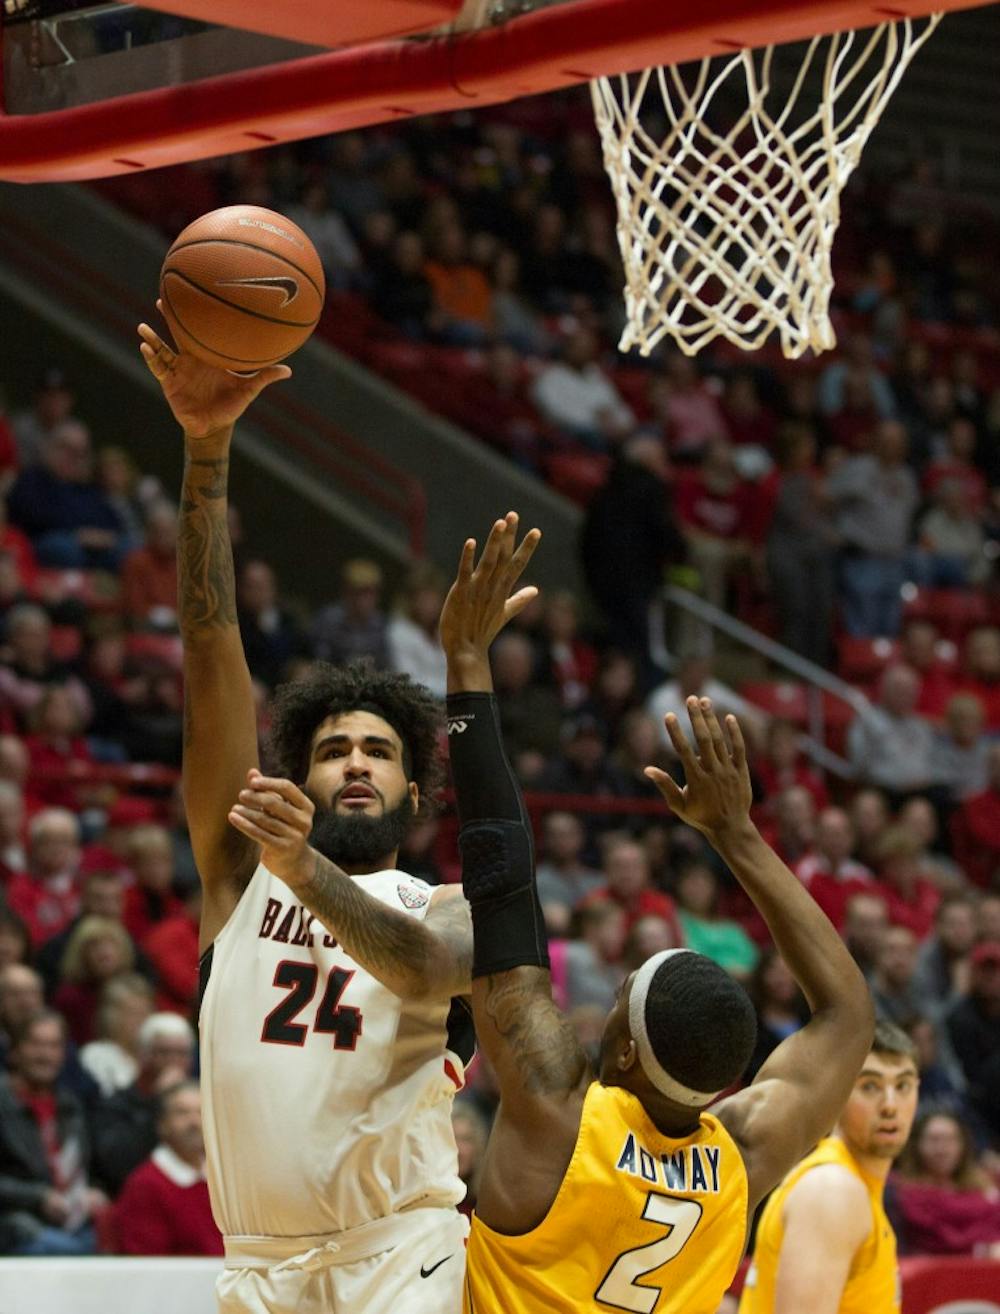 Junior Trey Moses goes in for a basket durring the first half of the against Toledo, OH. The cardinals were able to score 10 points before the Toledo rockets made a point. Worthen Arena, Feb. 17. Eric Pritchett, DN